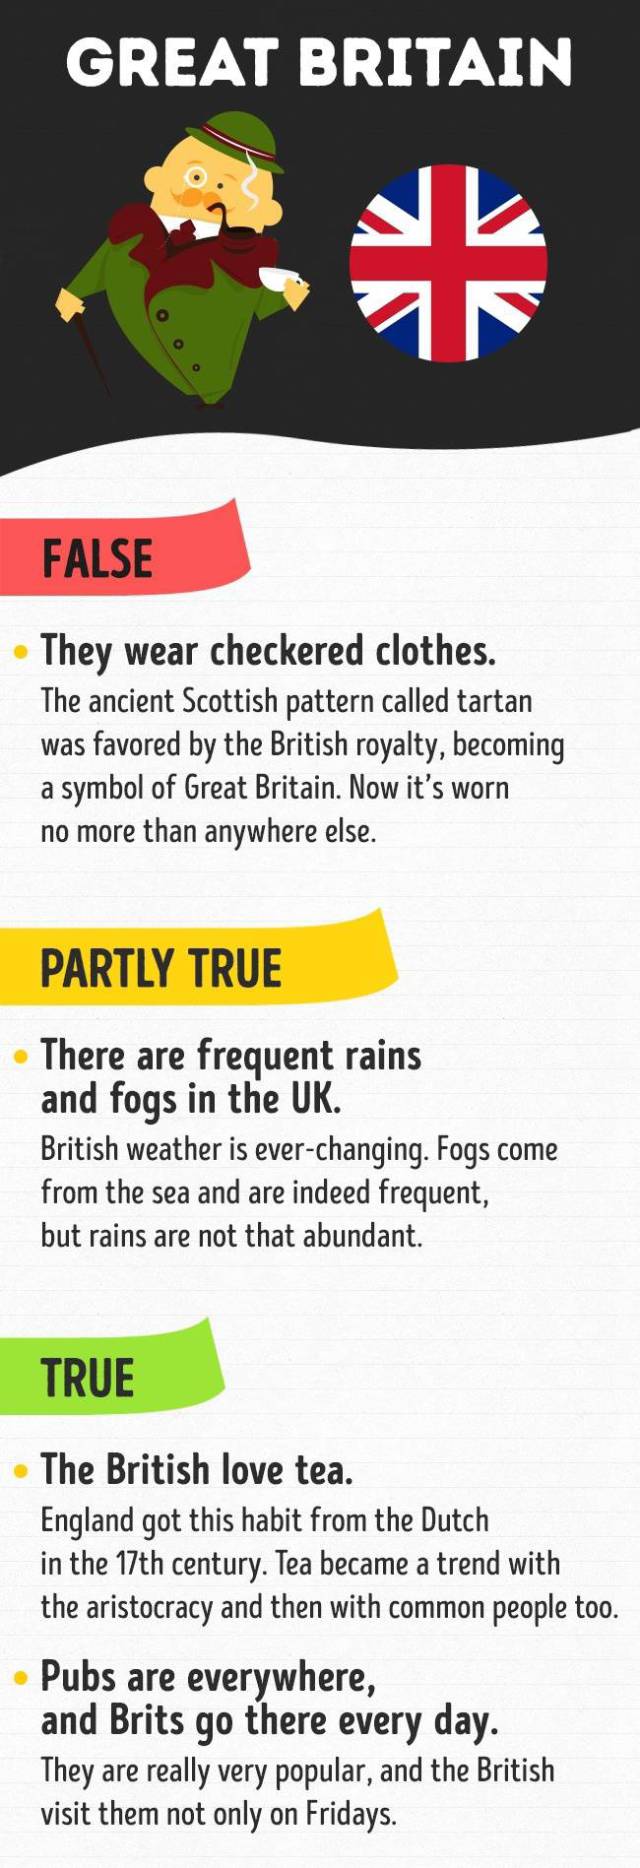 You Know All Of These Stereotypes About Nations. But Are They True?